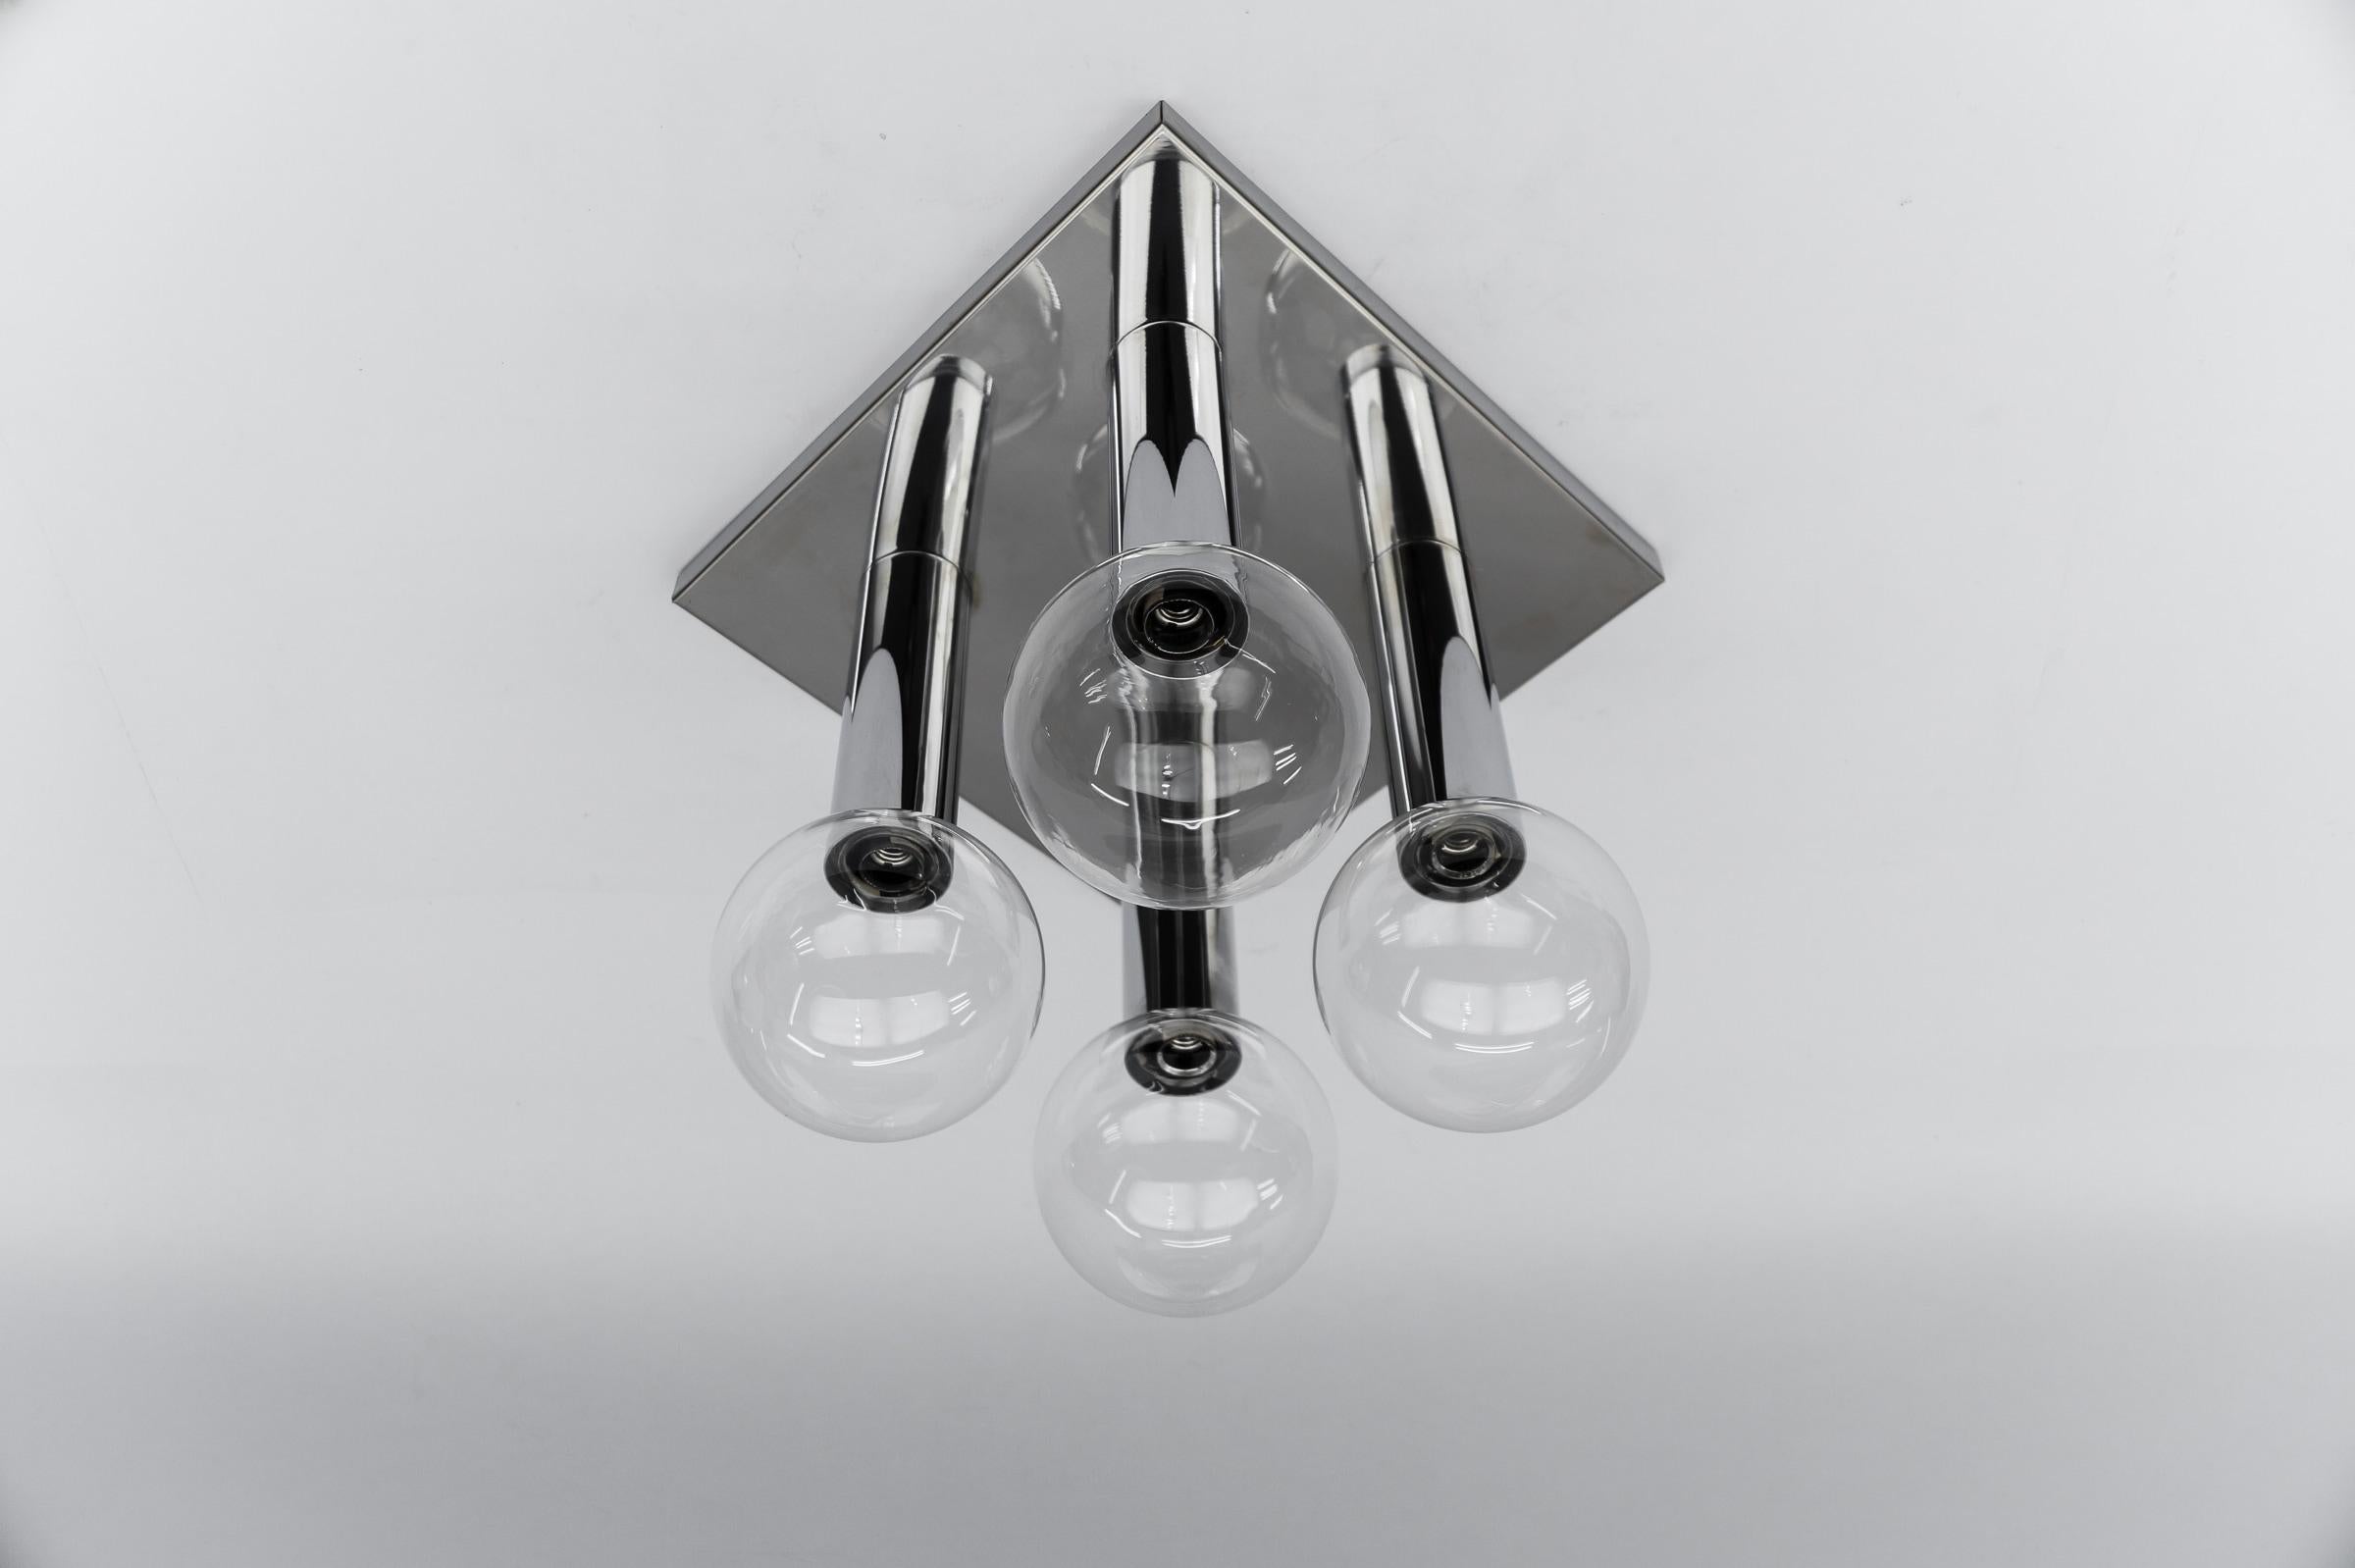 Space Age 1 of 2 Wall or Ceiling Lamp by Motoko Ishii for Staff Leuchten, 1970s For Sale